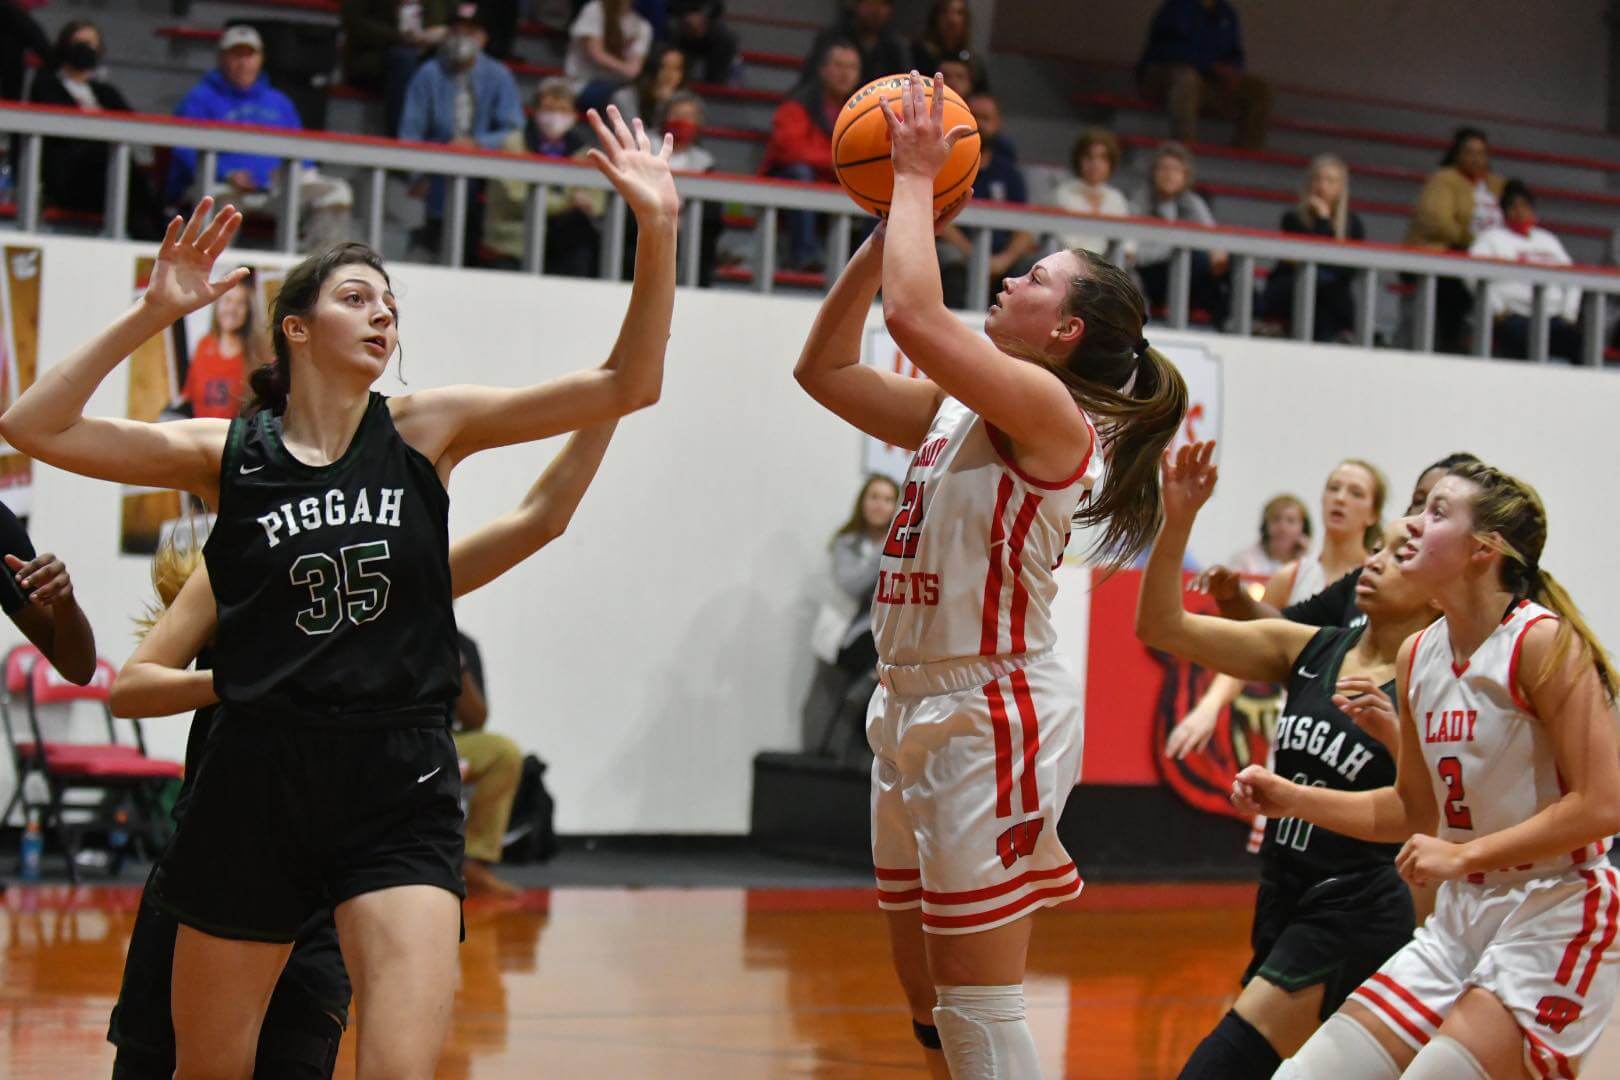 Walnut, Pine Grove and Blue Mountain girls advance in playoffs as Ripley girls season ends